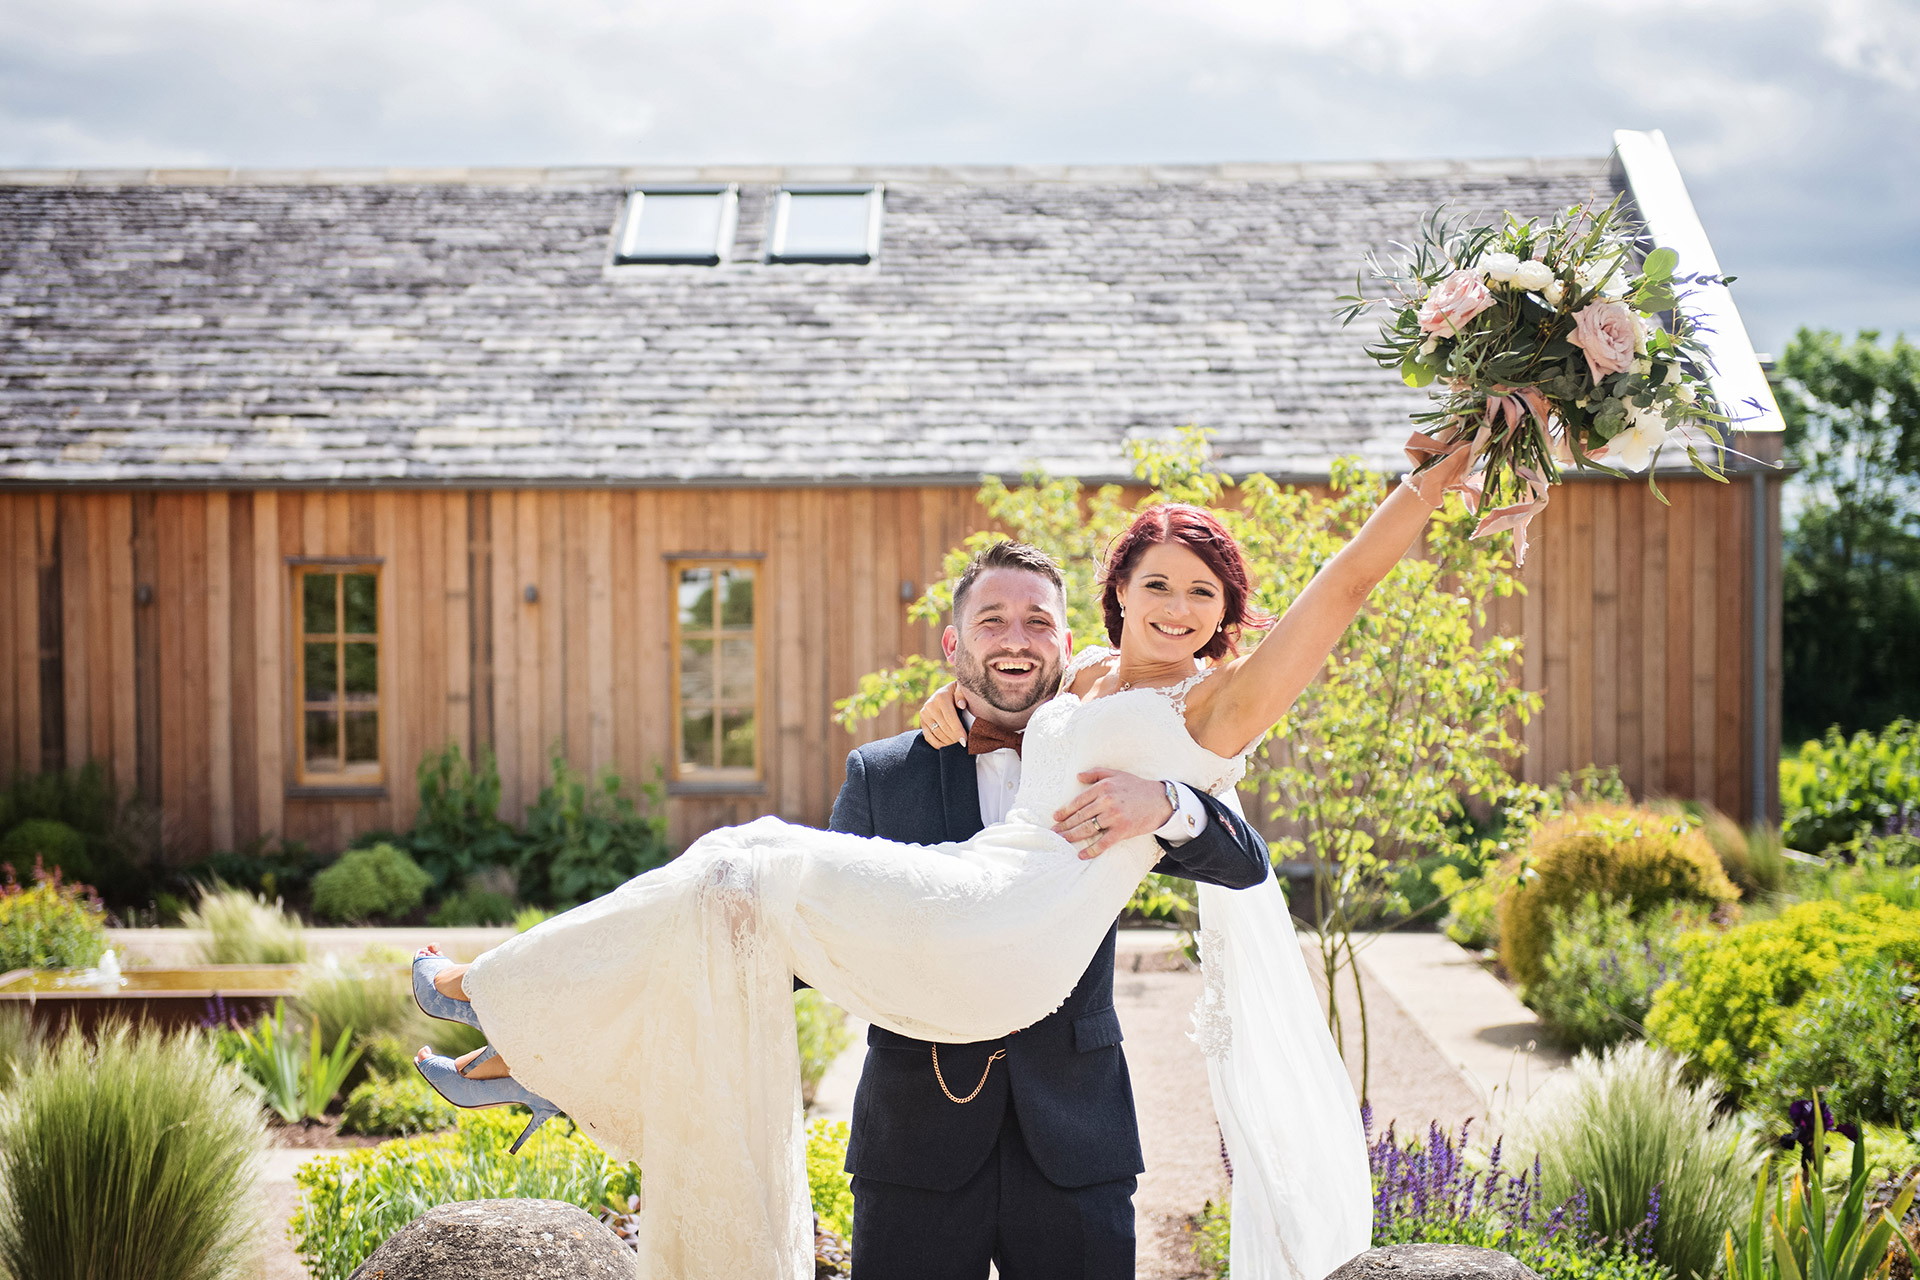 Groom carrying his new bride, with her arm raised holding her bouquet. Wooded barn and garden in the background.   